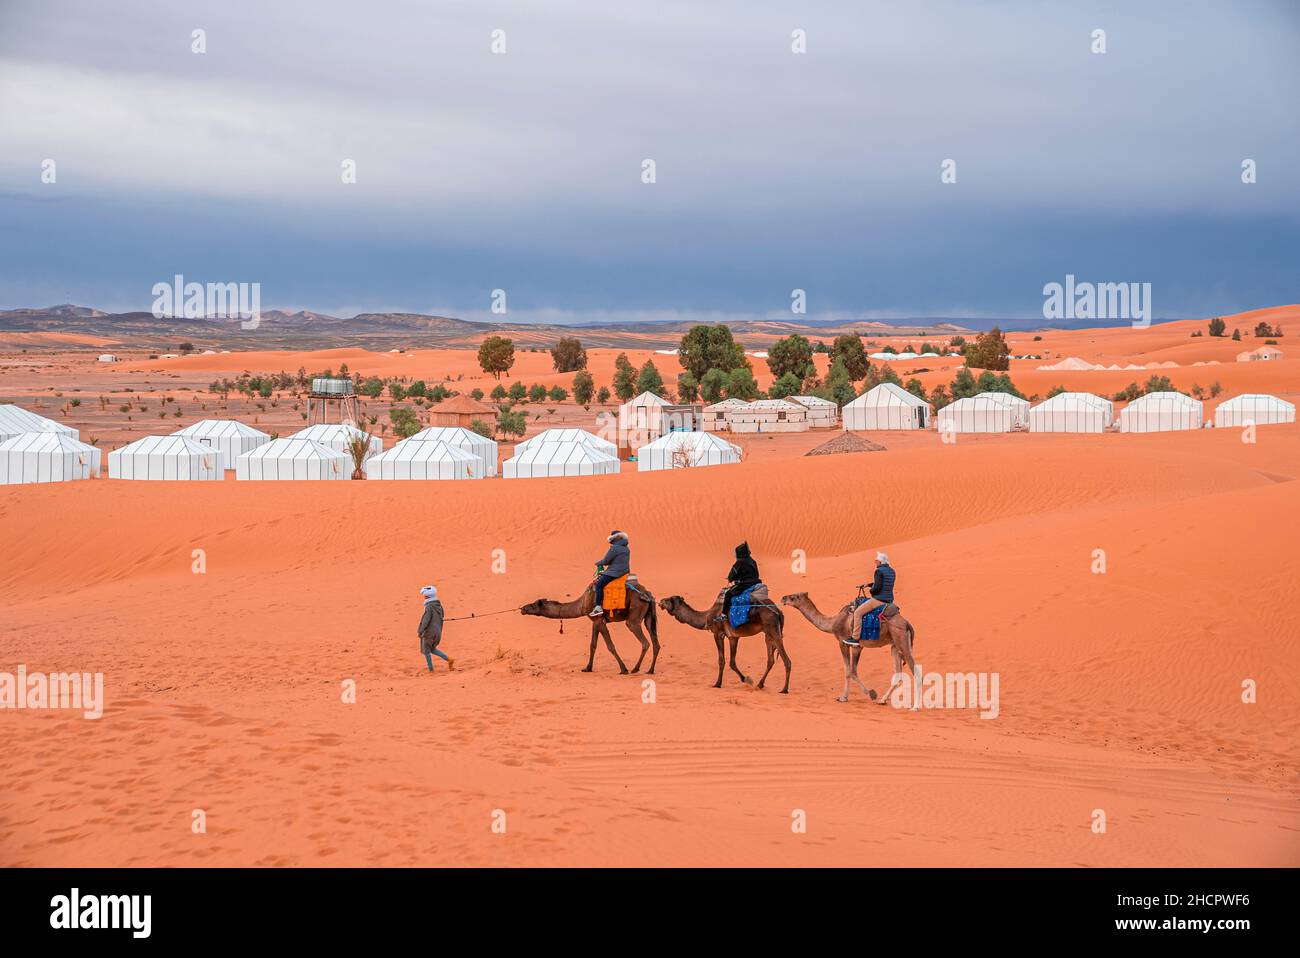 Bedouin leads caravan of camels with tourists through the sand in desert Stock Photo